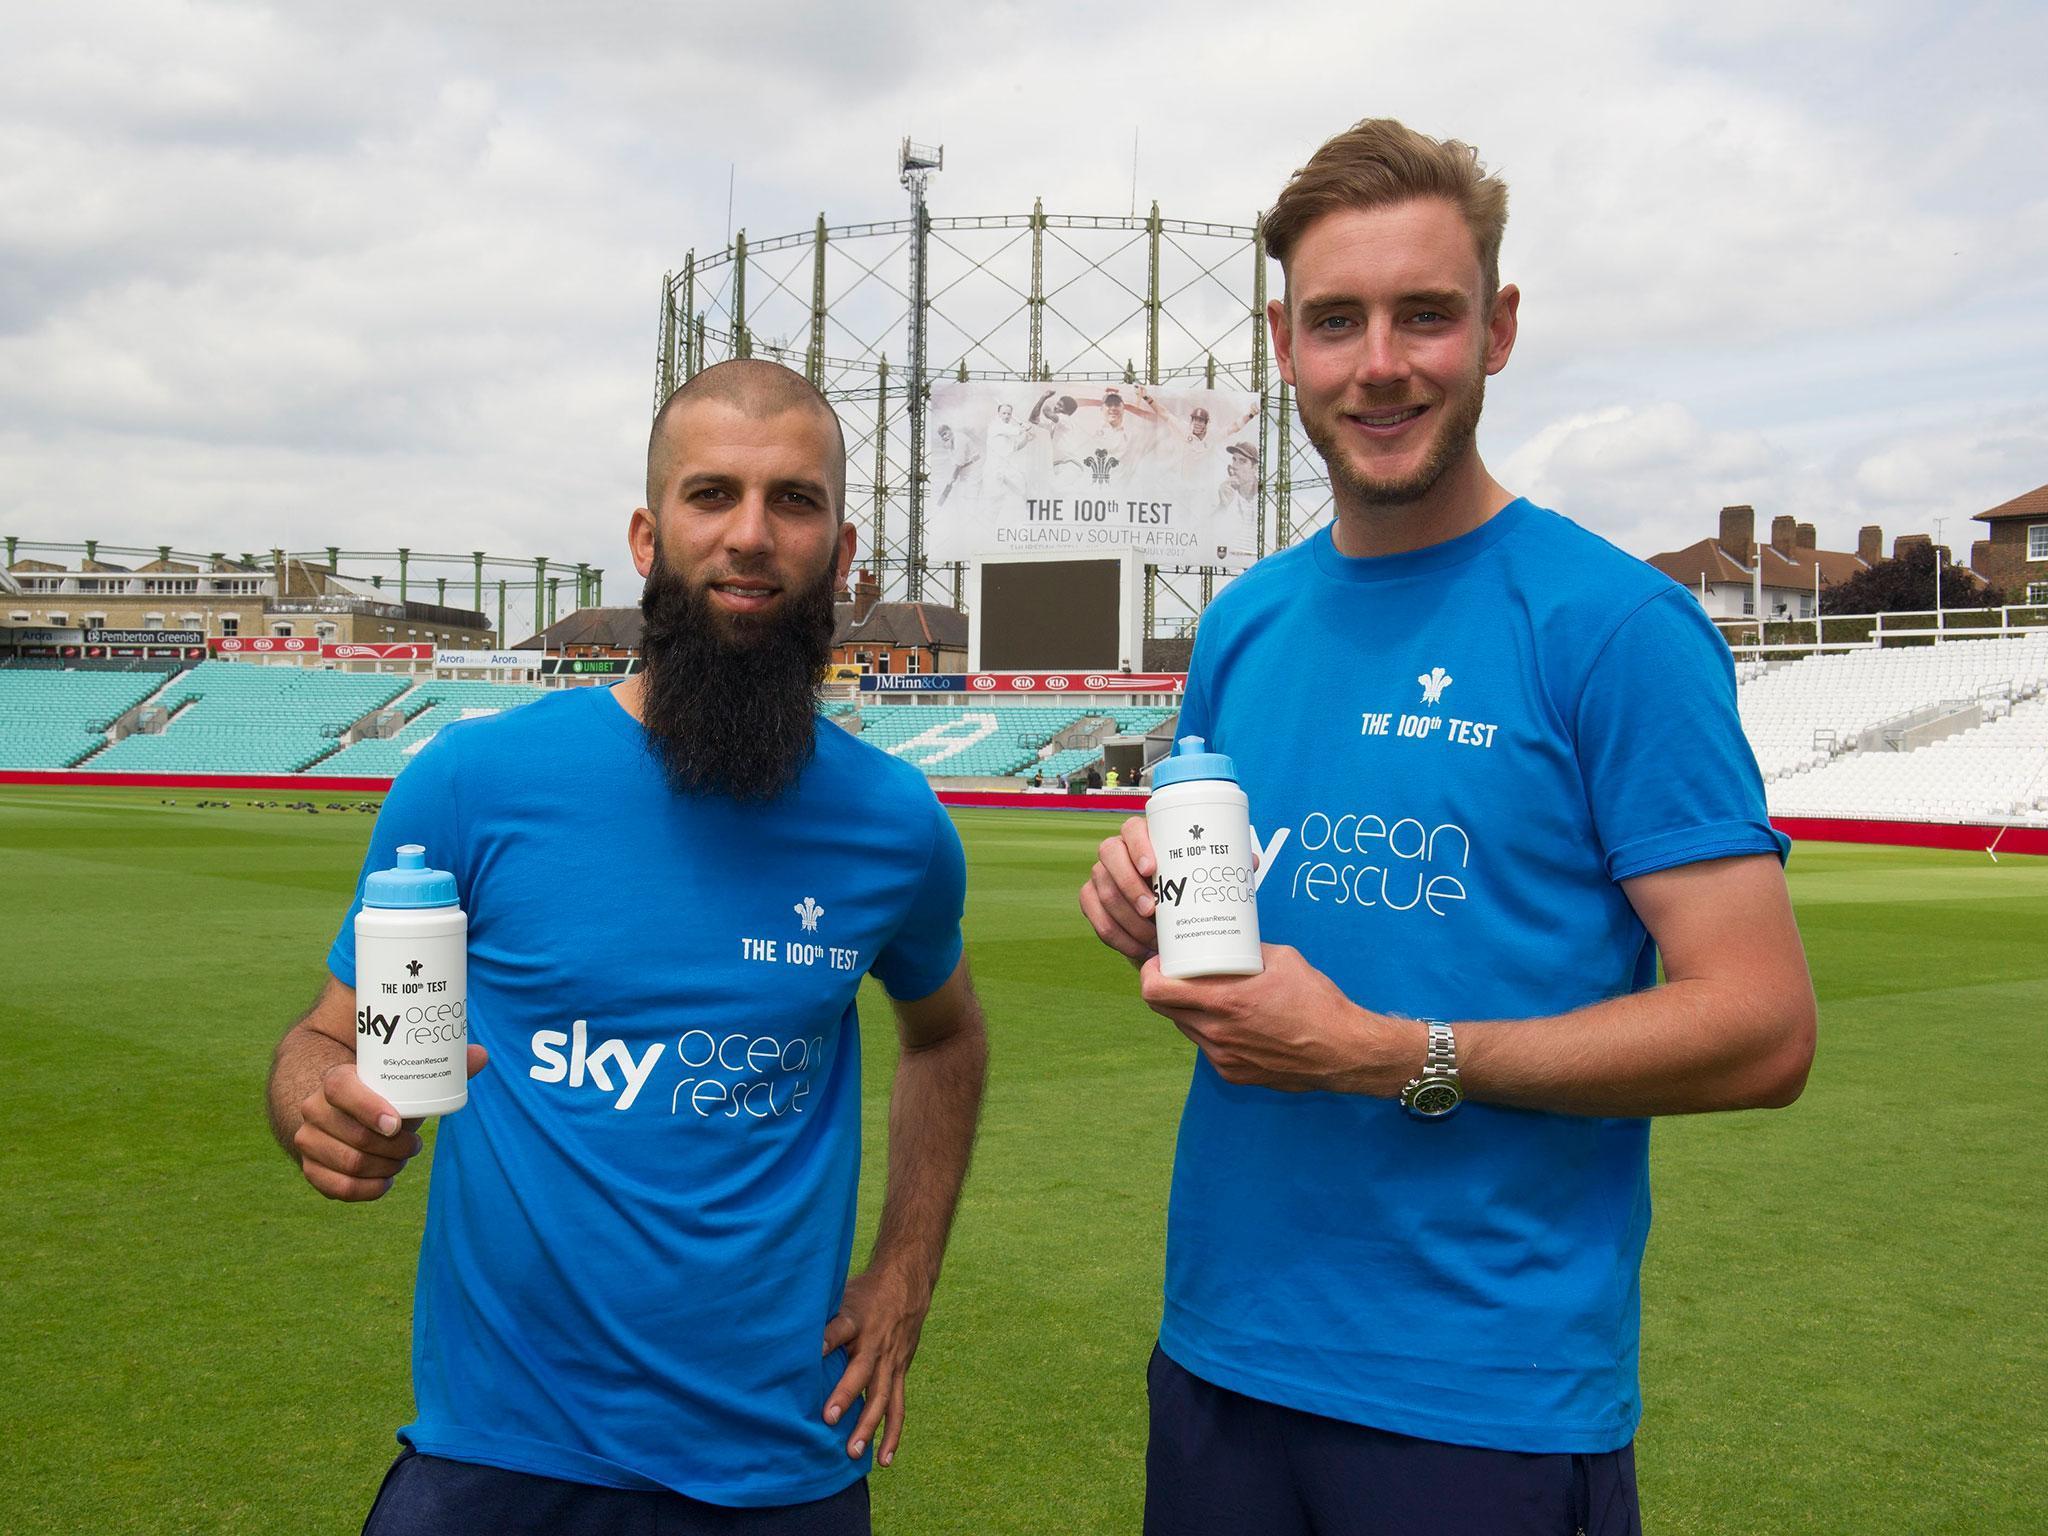 Sky Ocean Rescue teams up with Moeen Ali and Stuart Broad to help knock plastic out the stadium